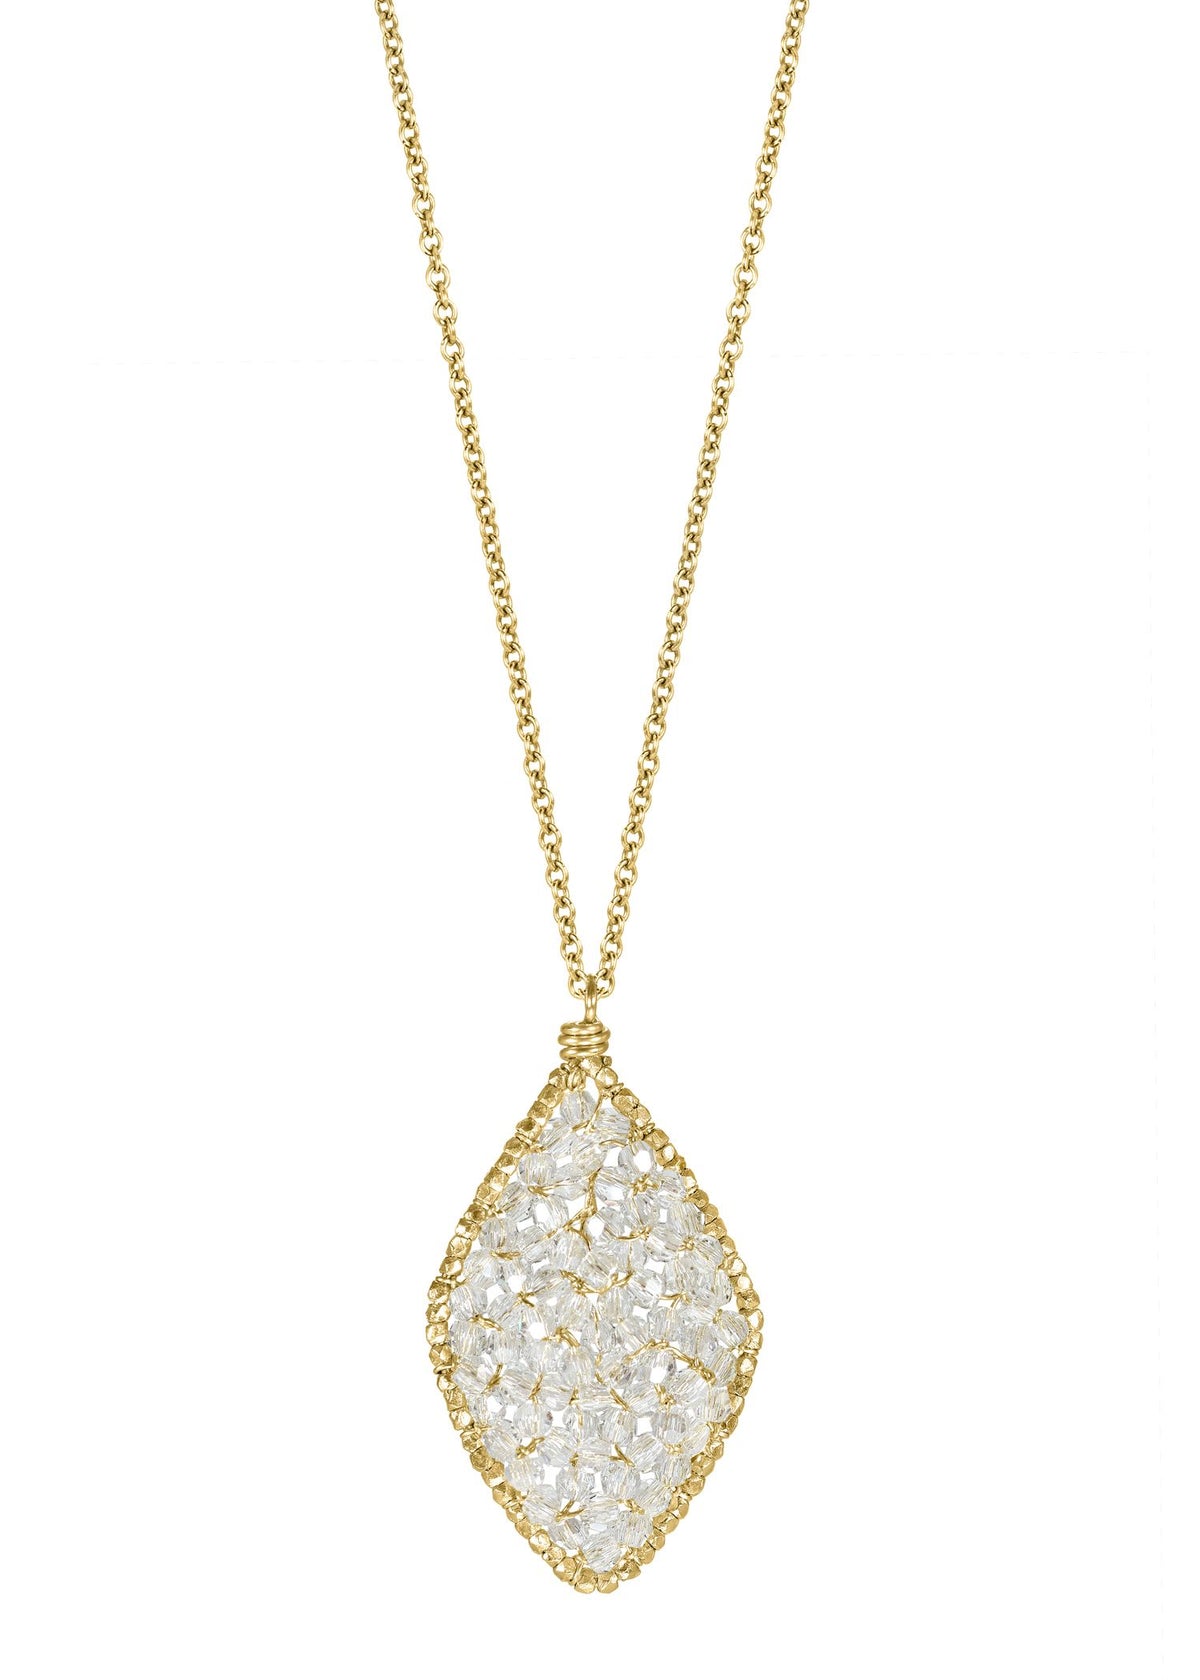 Crystal 14k gold fill and 14k gold vermeil sterling silver Necklace measures 17” in length Pendant measures 1” in length and 5/8” in width Handmade in our Los Angeles studio